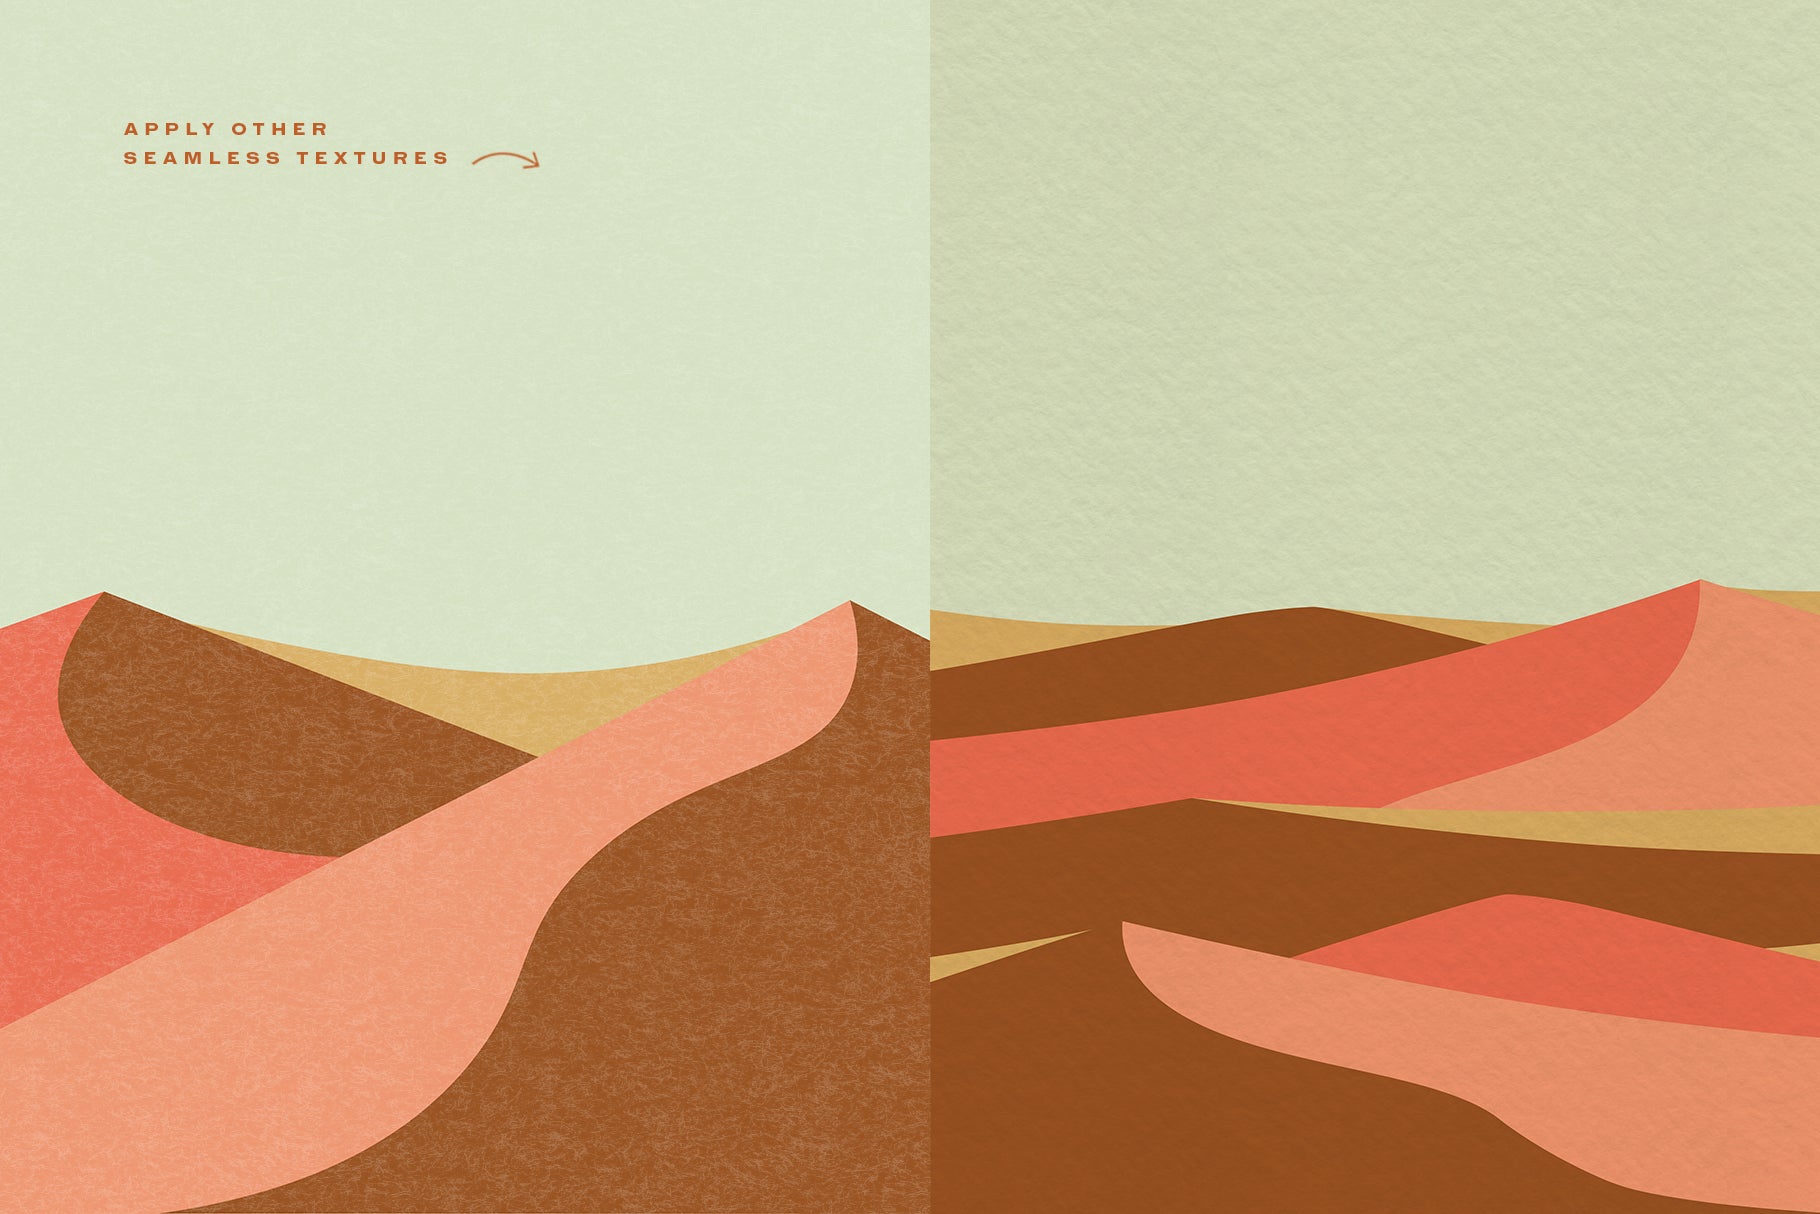 paper textures on top of vibrant landscape graphics